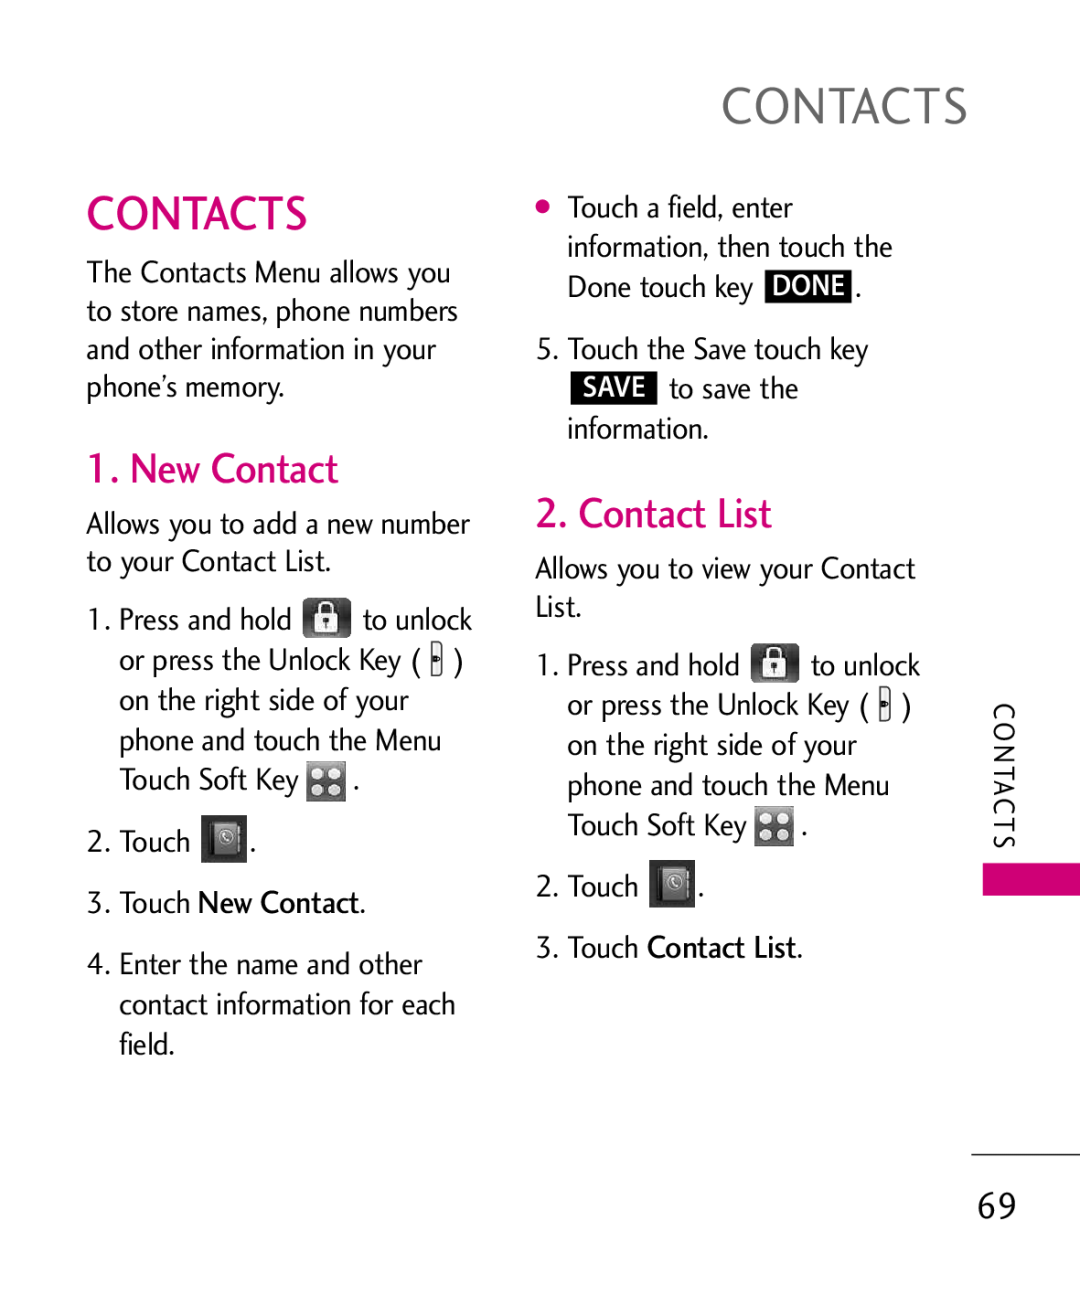 LG Electronics MMBB0379501 manual Contacts, Touch New Contact, Touch Contact List 